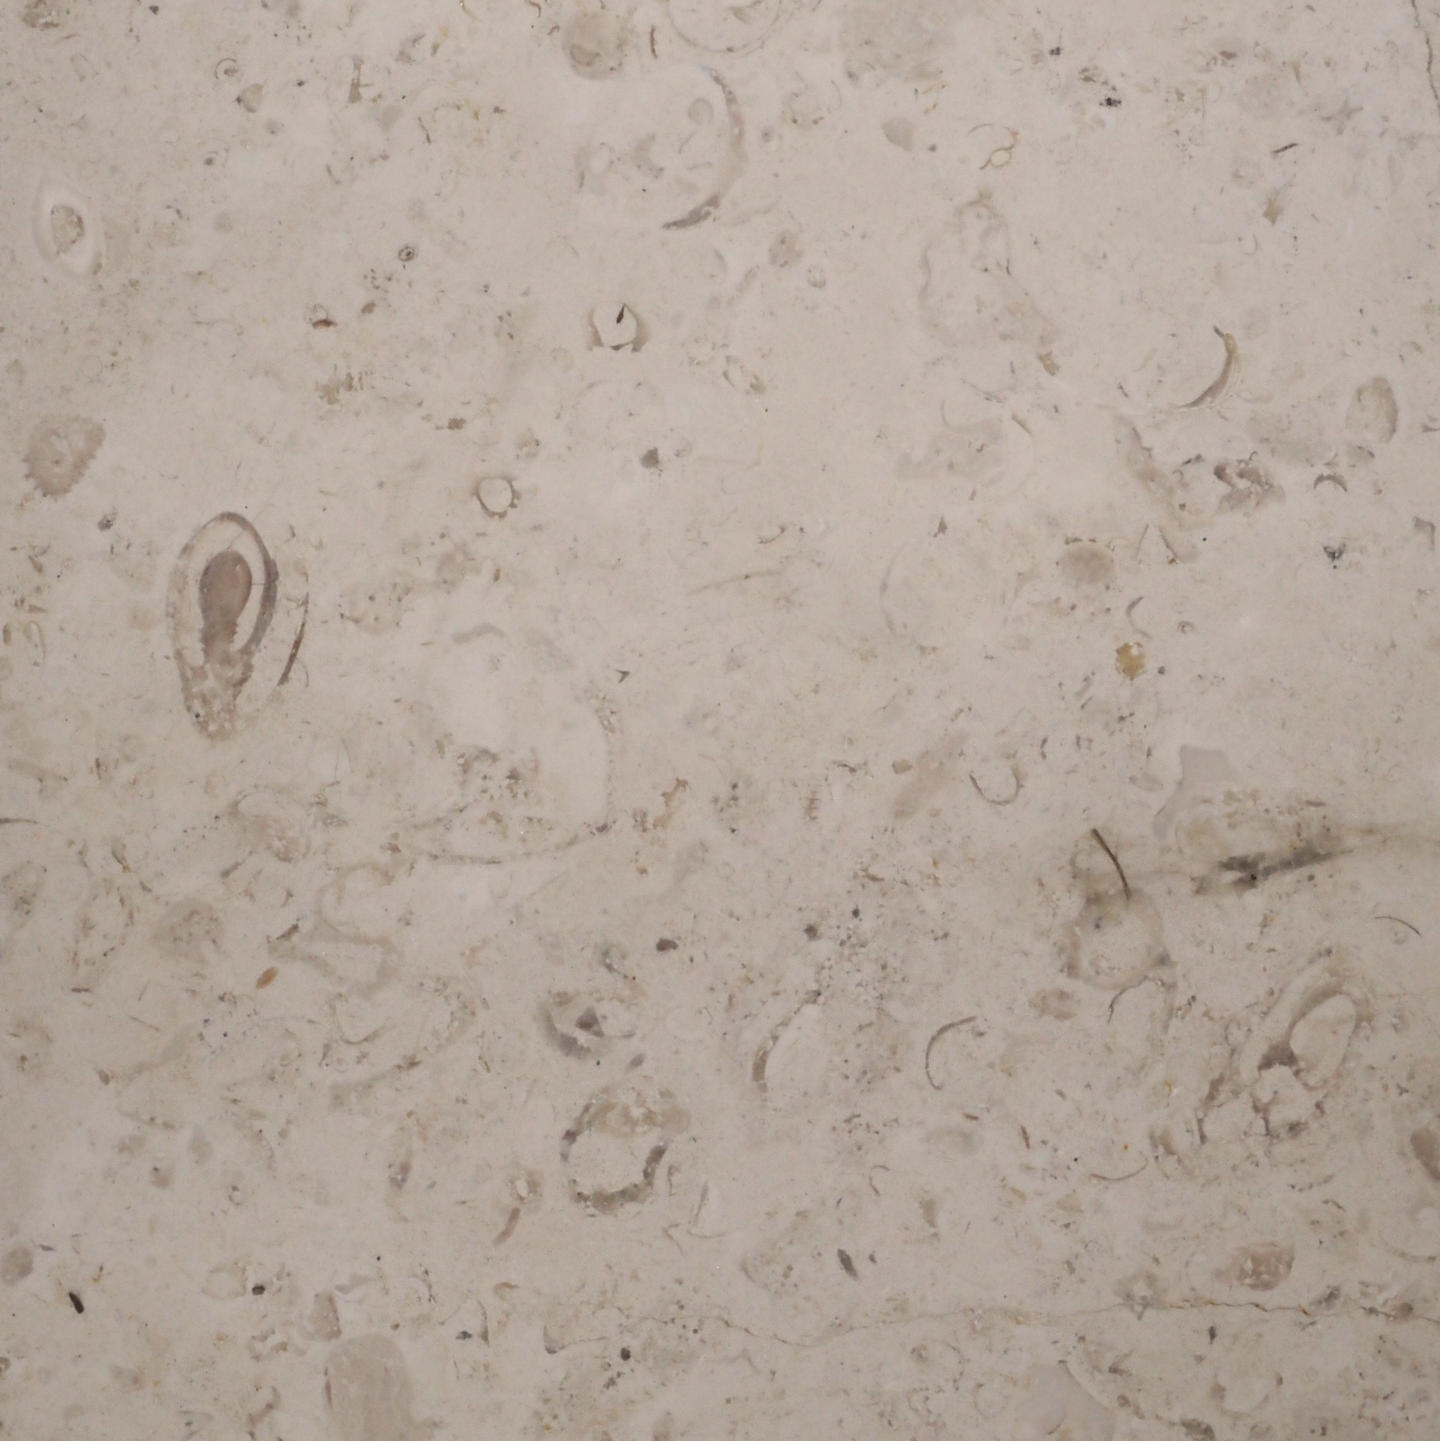 Comblanchien limestone tiles - Only available in our physical shop